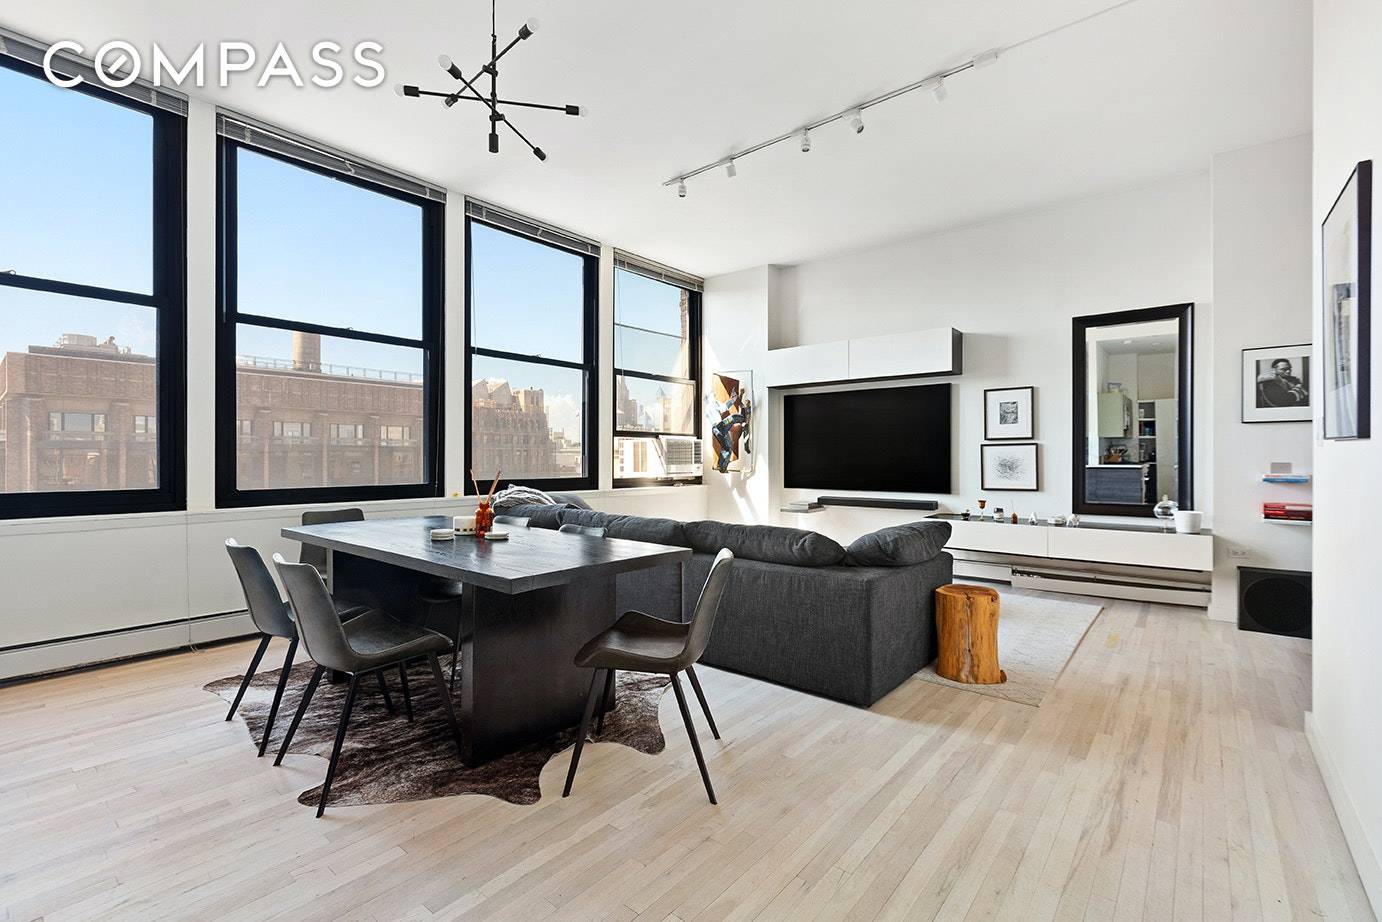 BIG amp ; BRIGHT Welcome to 250 Mercer, located on the border of Noho and Greenwich Village, this loft like apartment is perfectly situated for quintessential Downtown living.